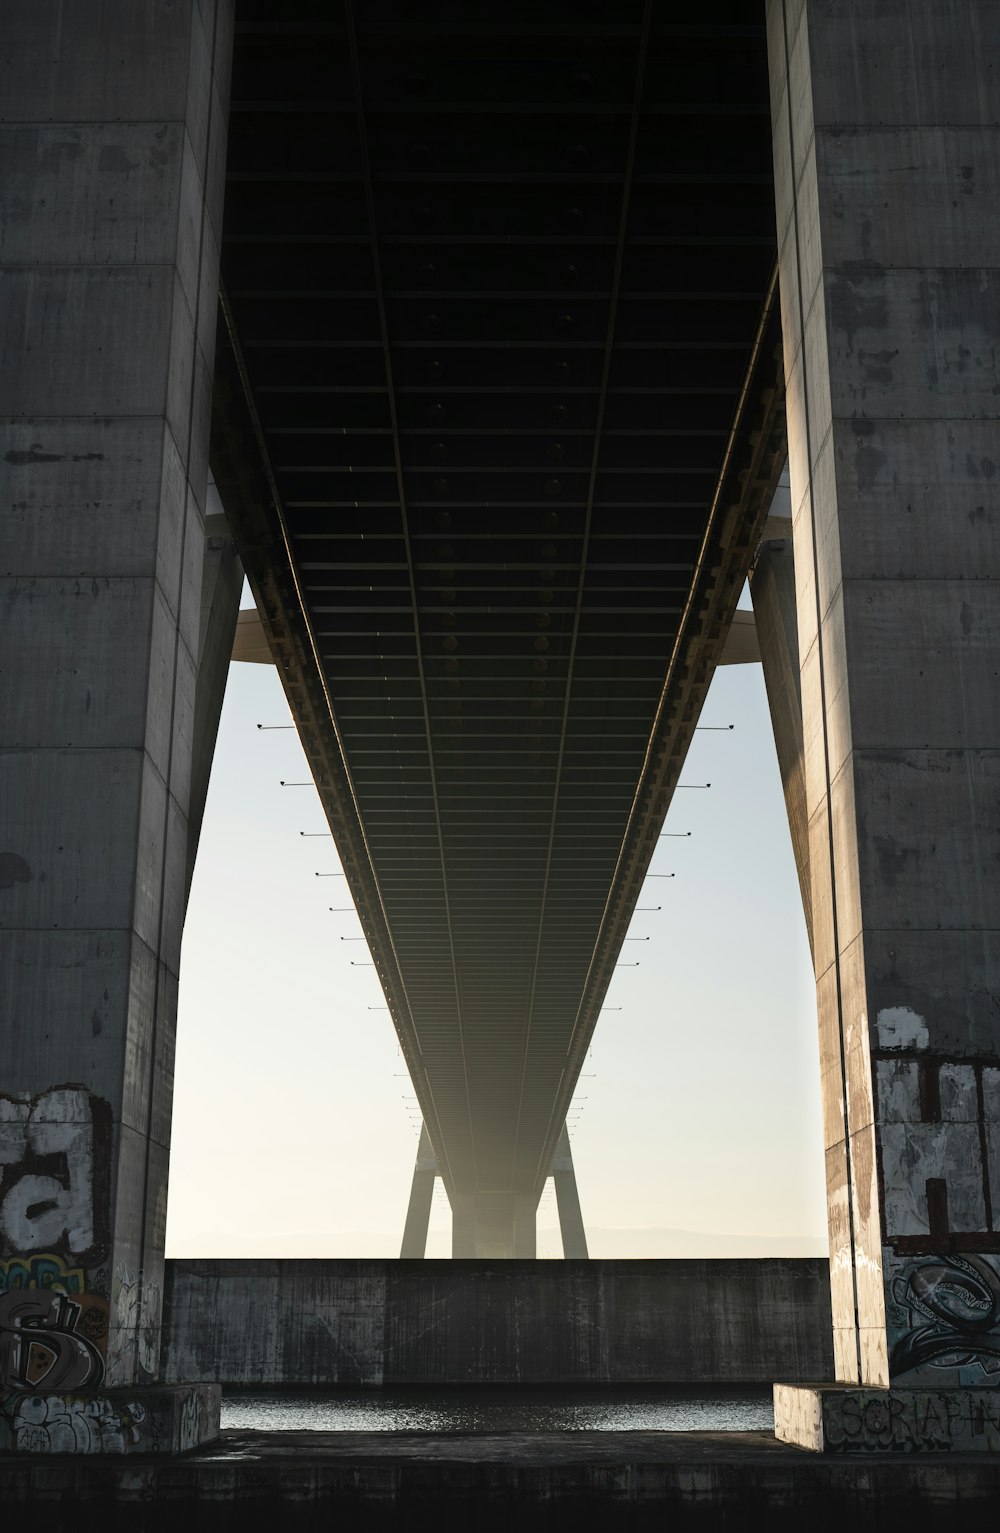 a view of the underside of a bridge over water